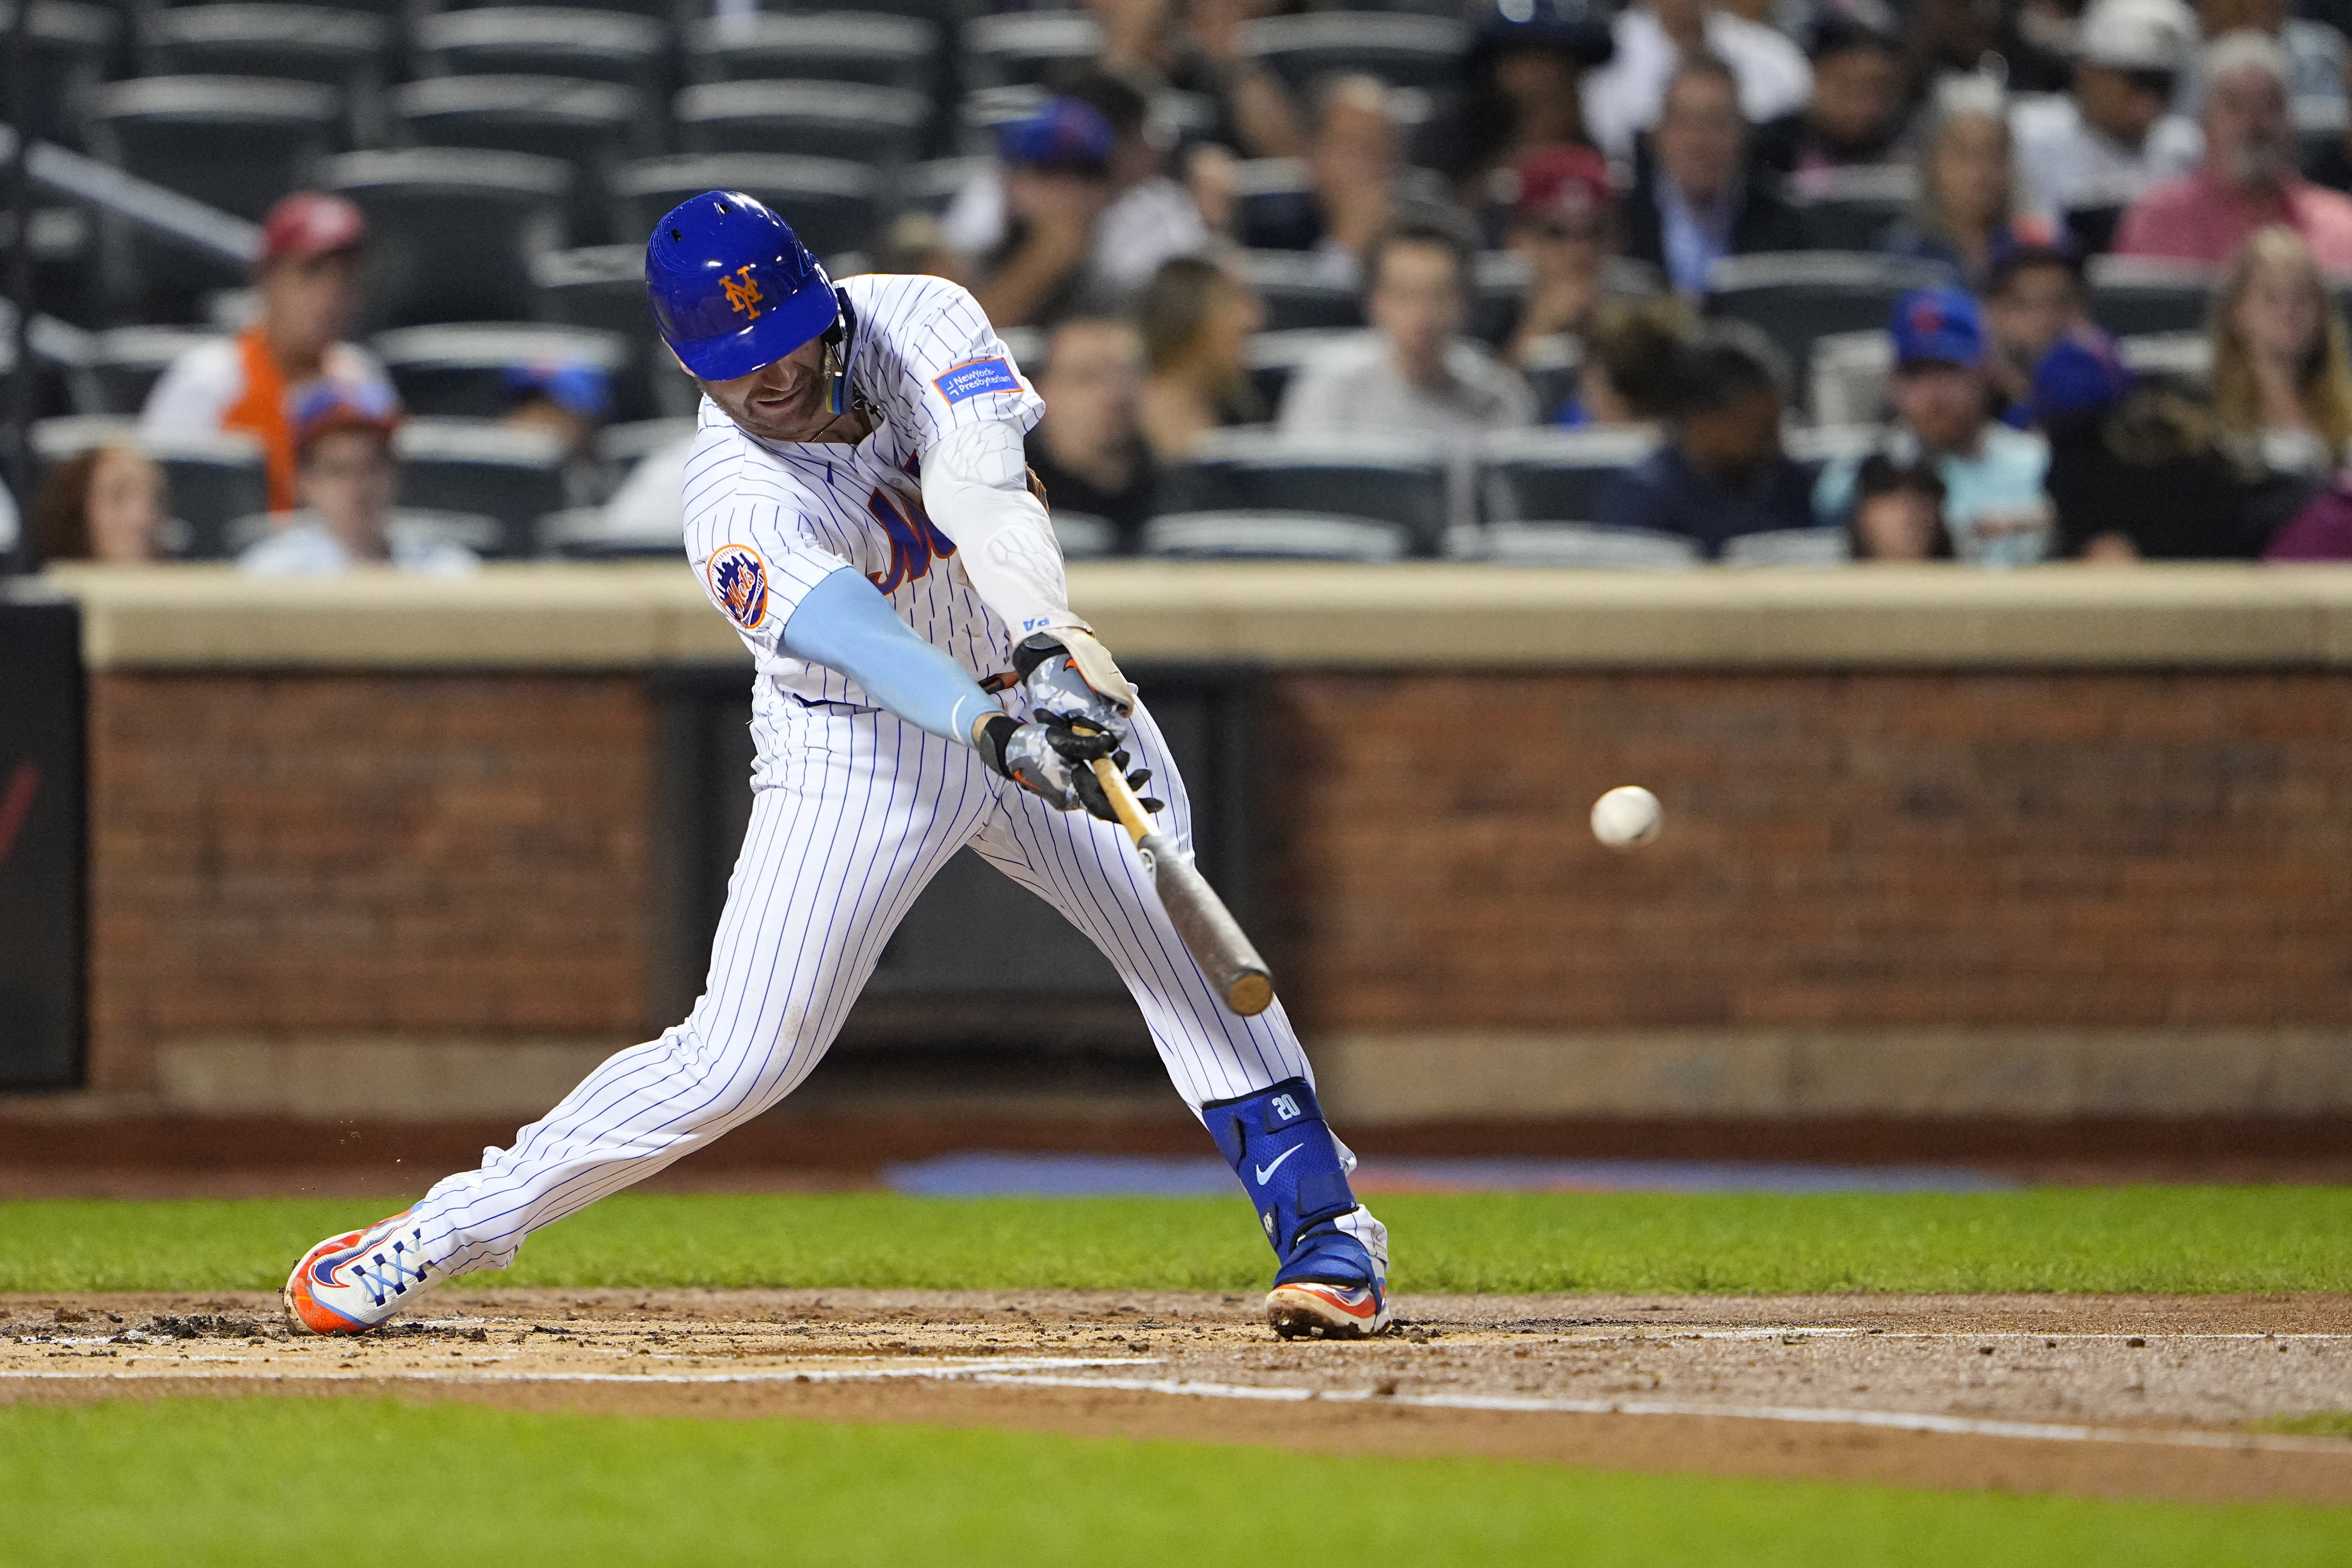 Former Gator Pete Alonso continues record-setting season in New York